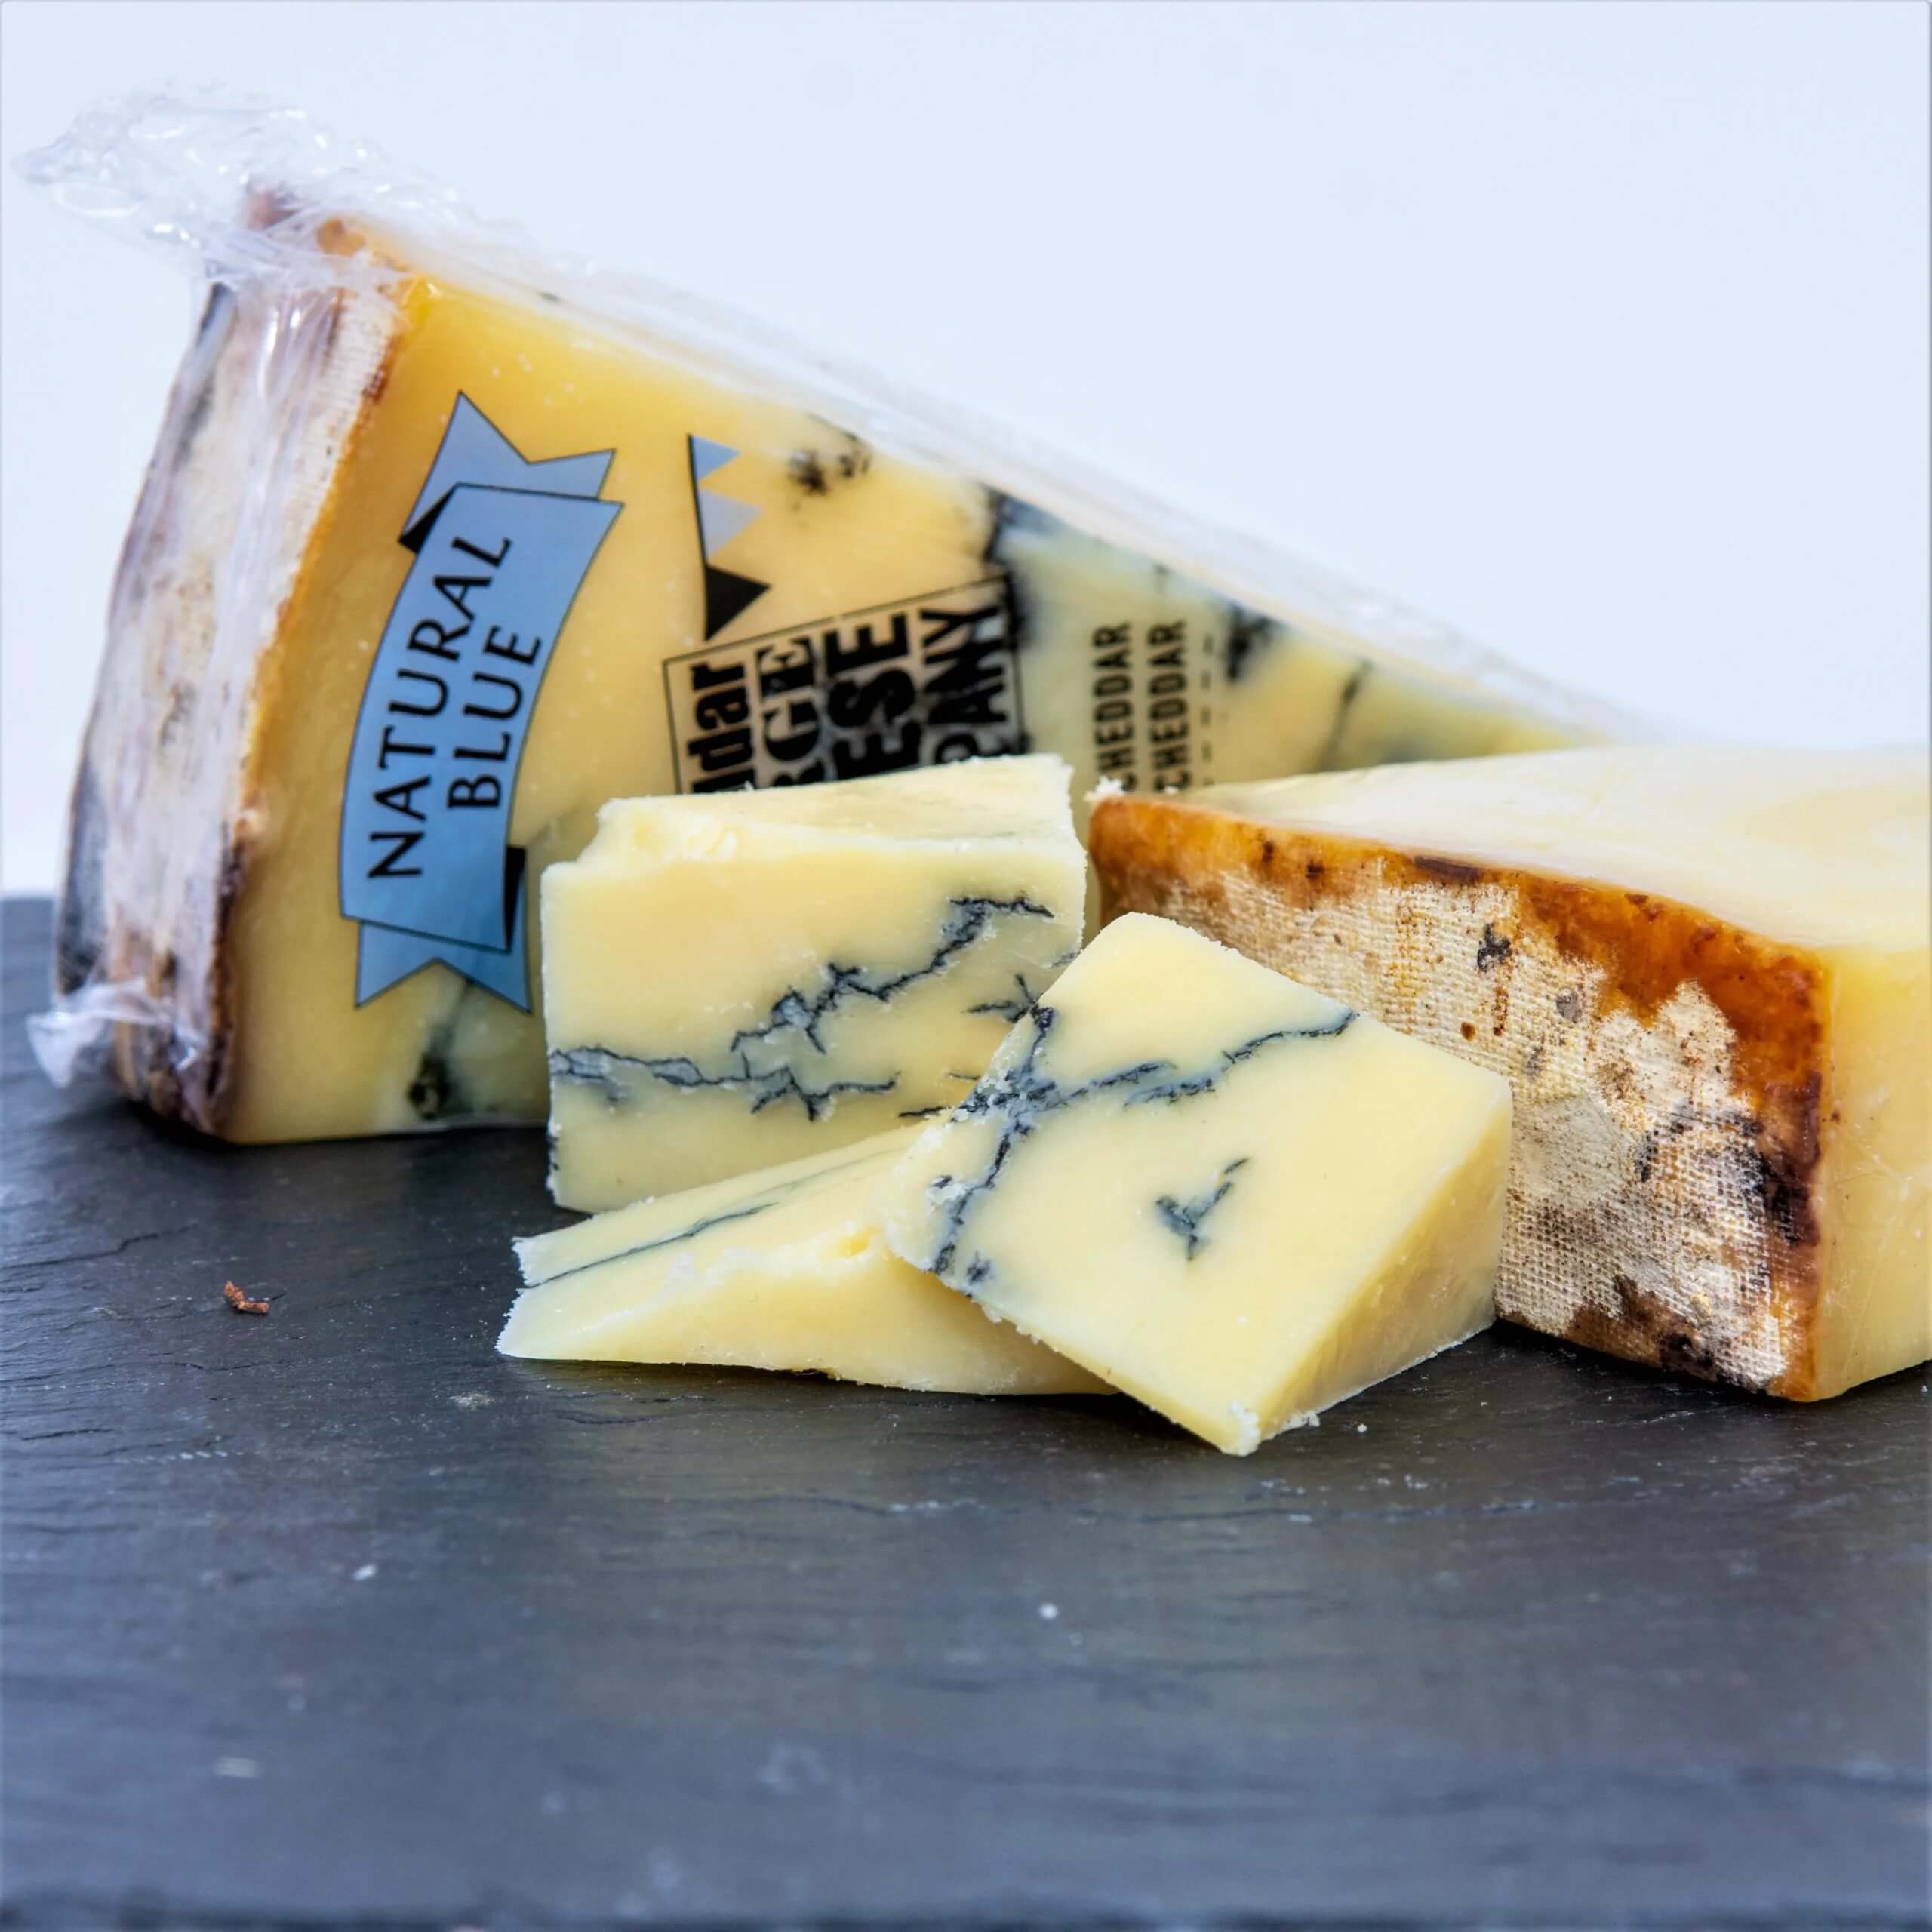 Image of Cheddar Gorge Natural Blue Cheddar made in the UK by The Cheddar Gorge Cheese Company. Buying this product supports a UK business, jobs and the local community